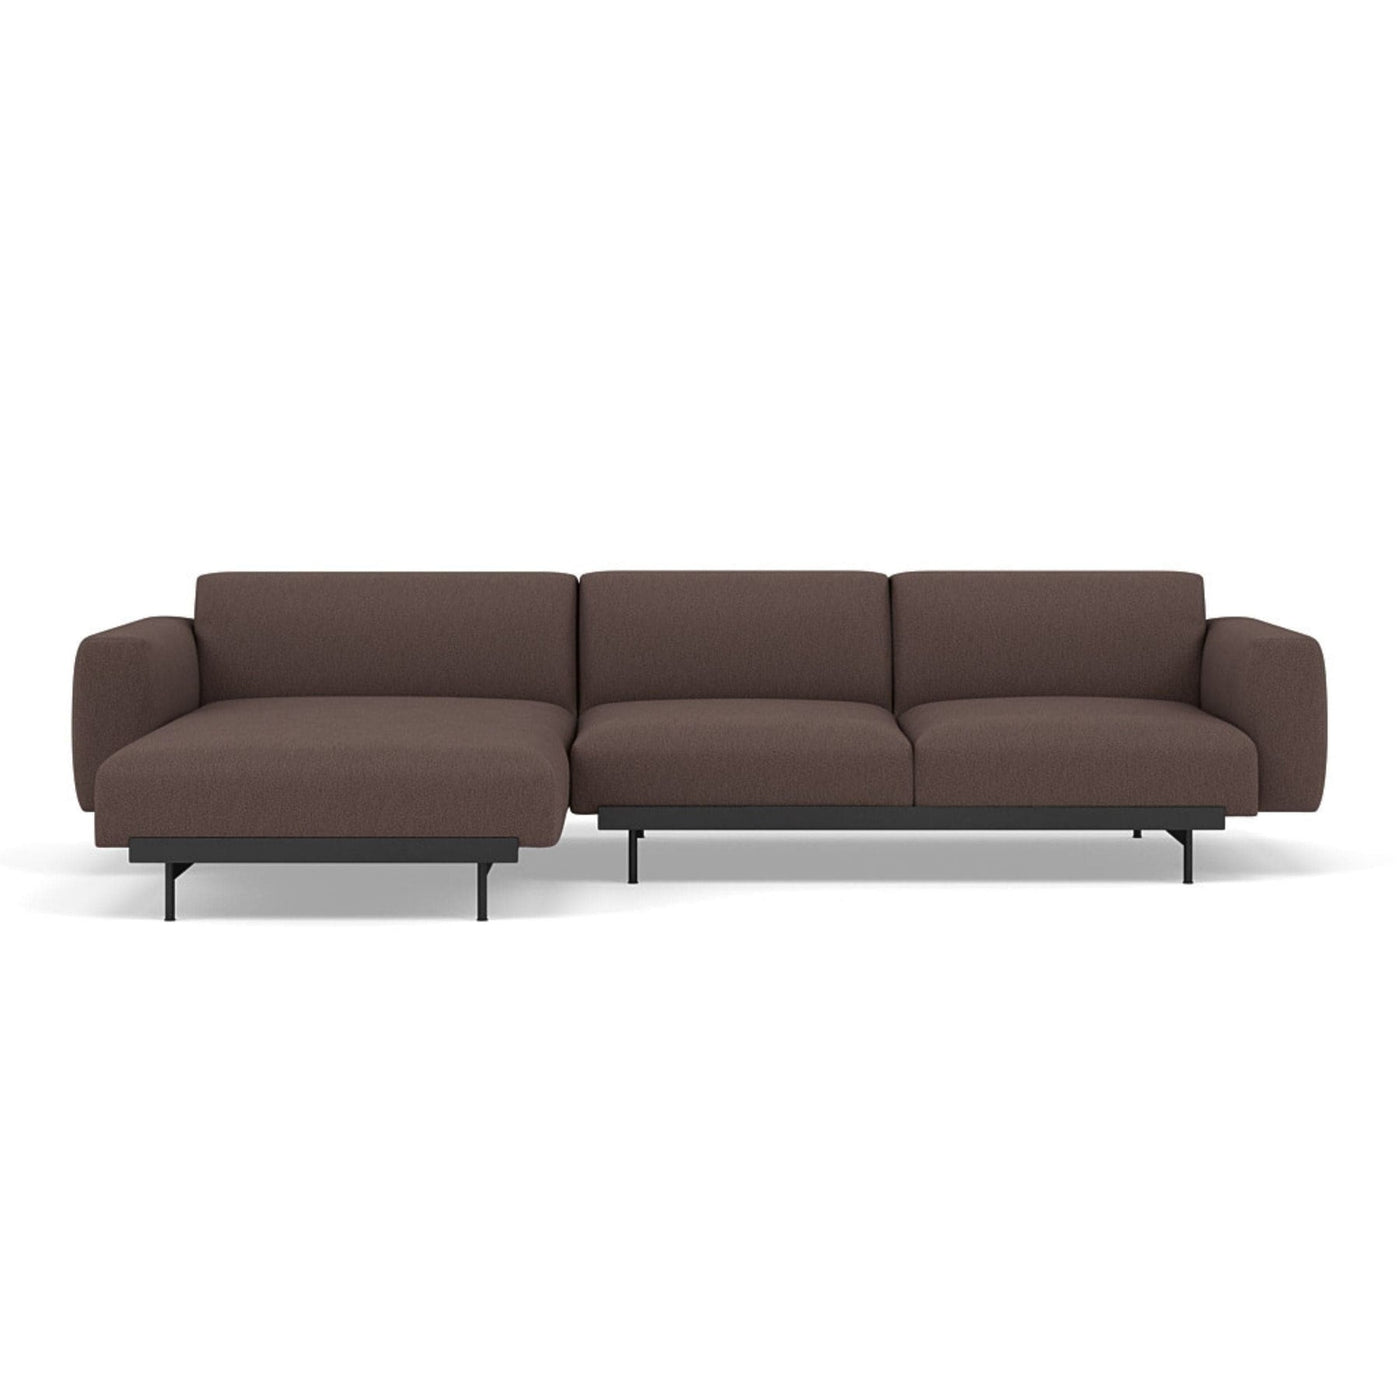 Muuto In Situ Sofa 3 seater configuration 7 in clay 6 fabric. Made to order at someday designs. #colour_clay-6-red-brown